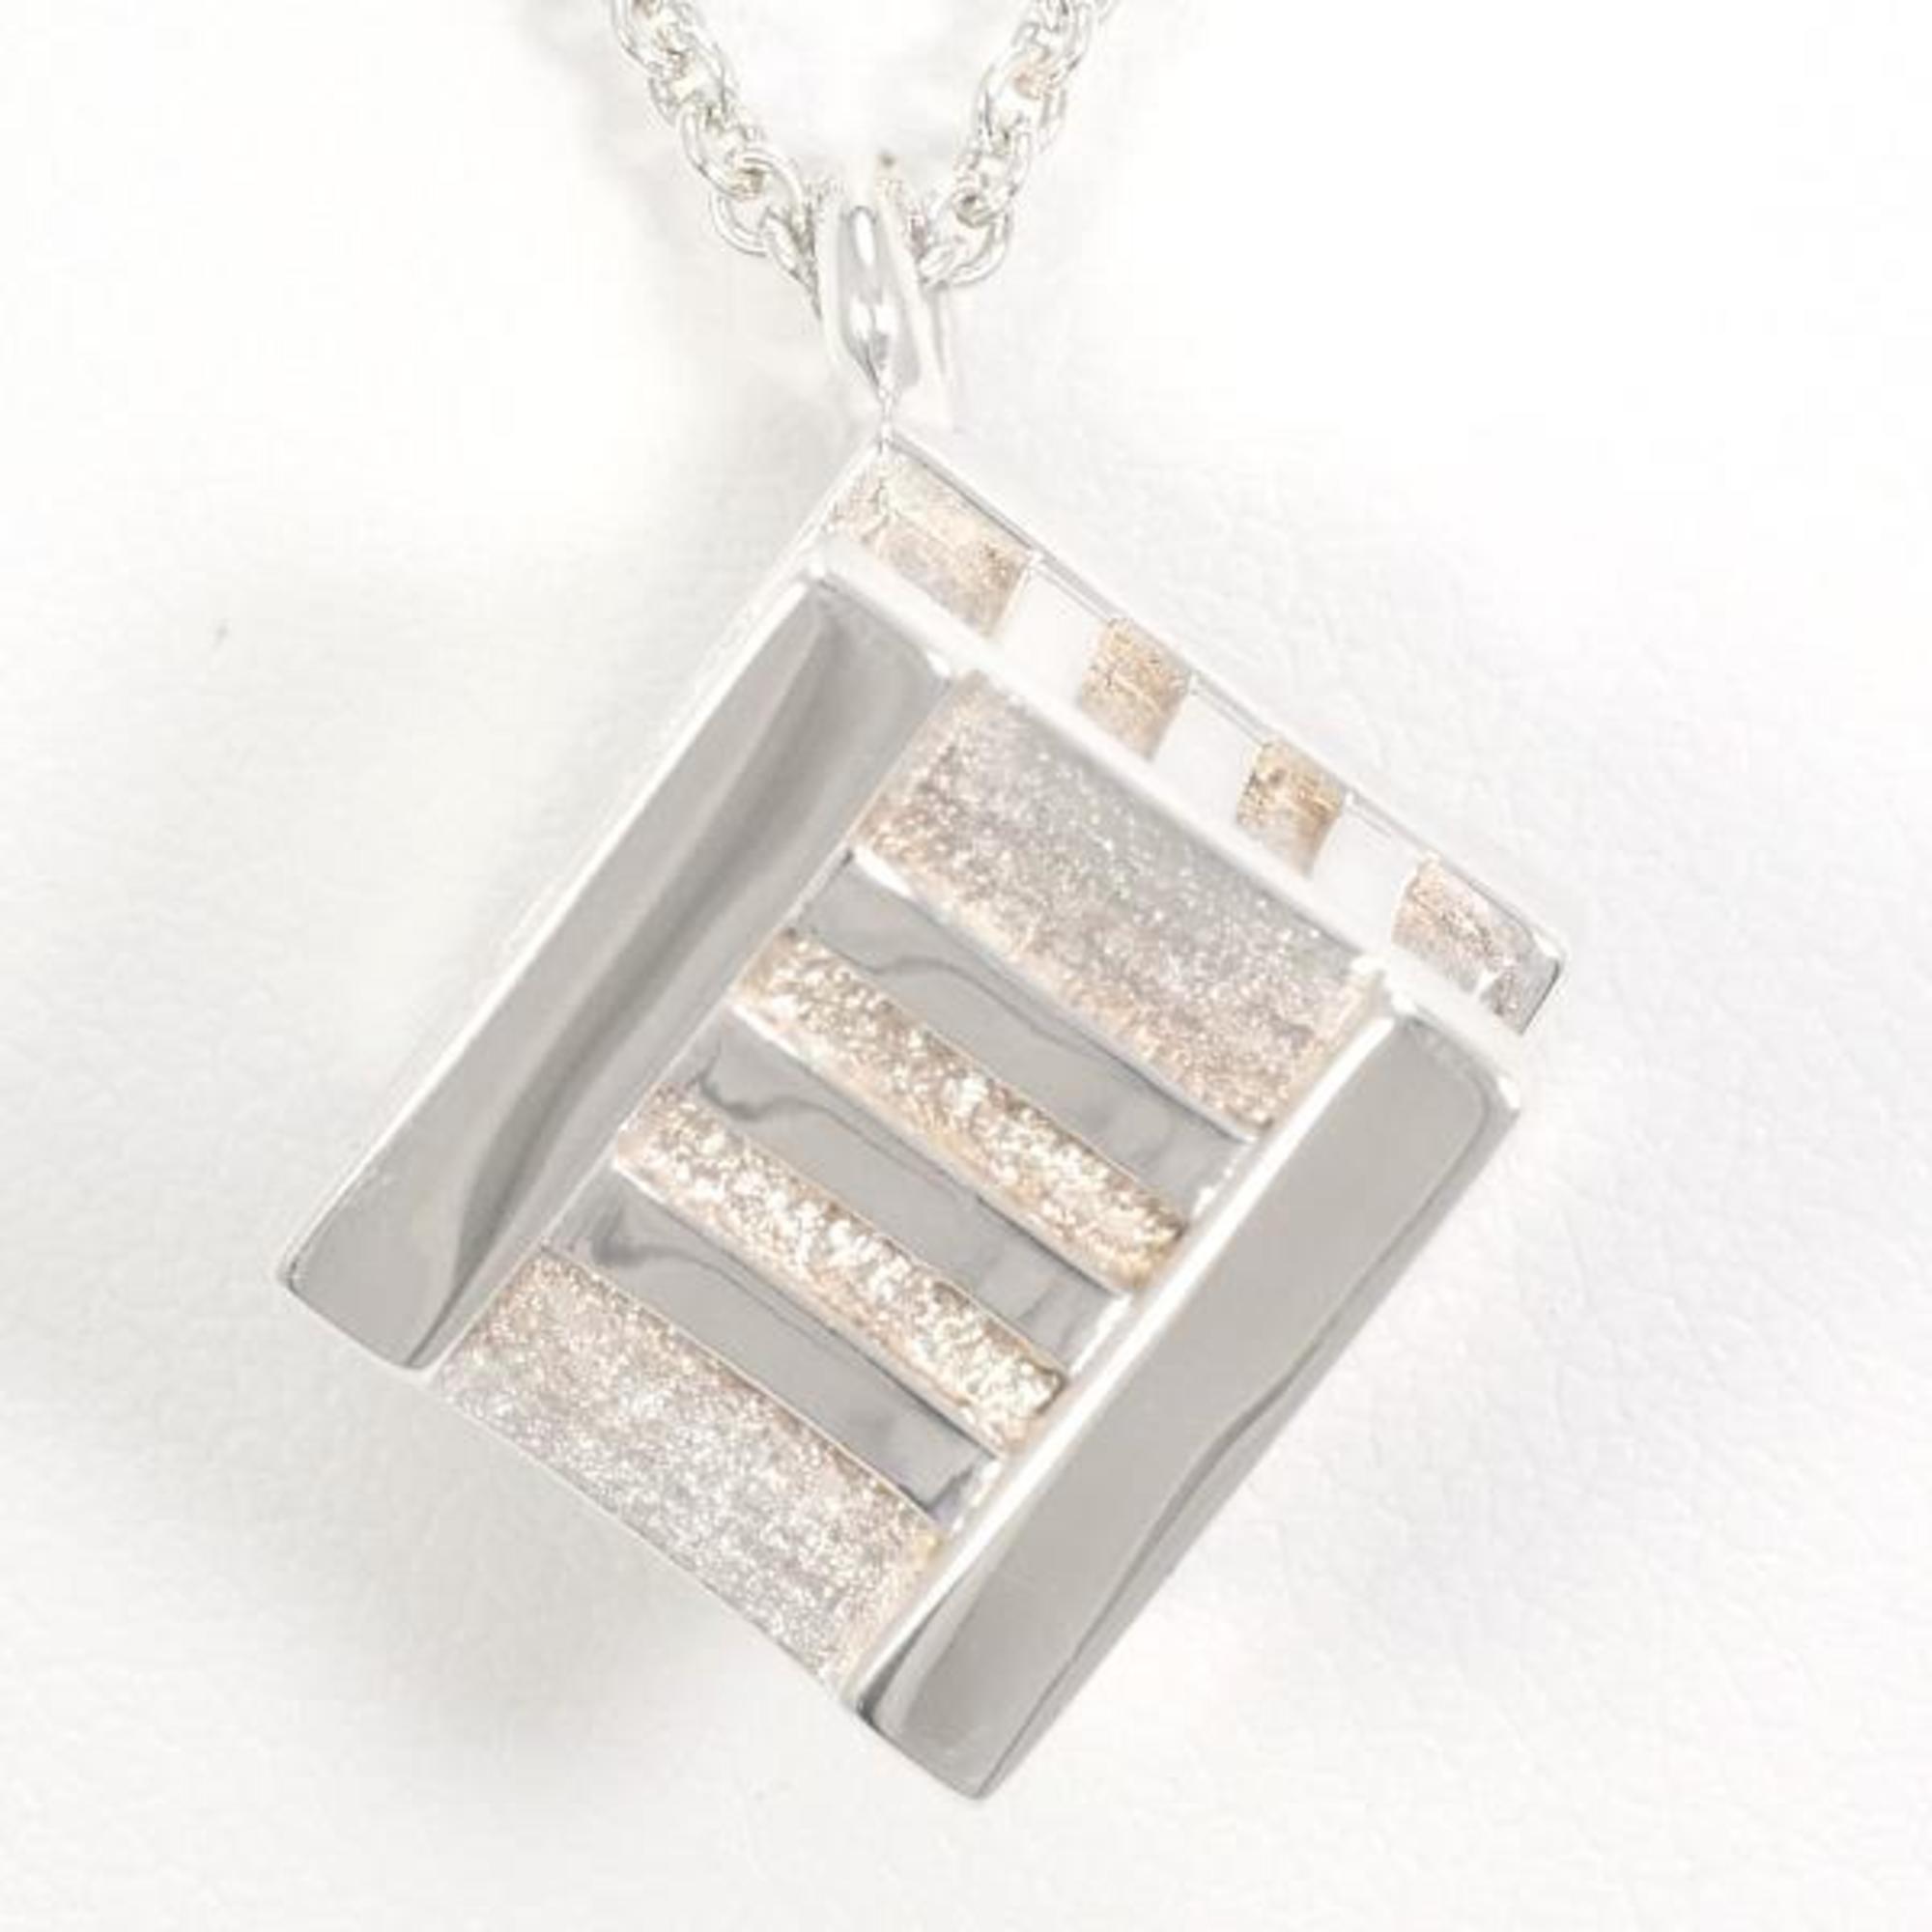 Tiffany Atlas Cube Silver Necklace Box Bag Total Weight Approx. 19.8g 46cm Jewelry